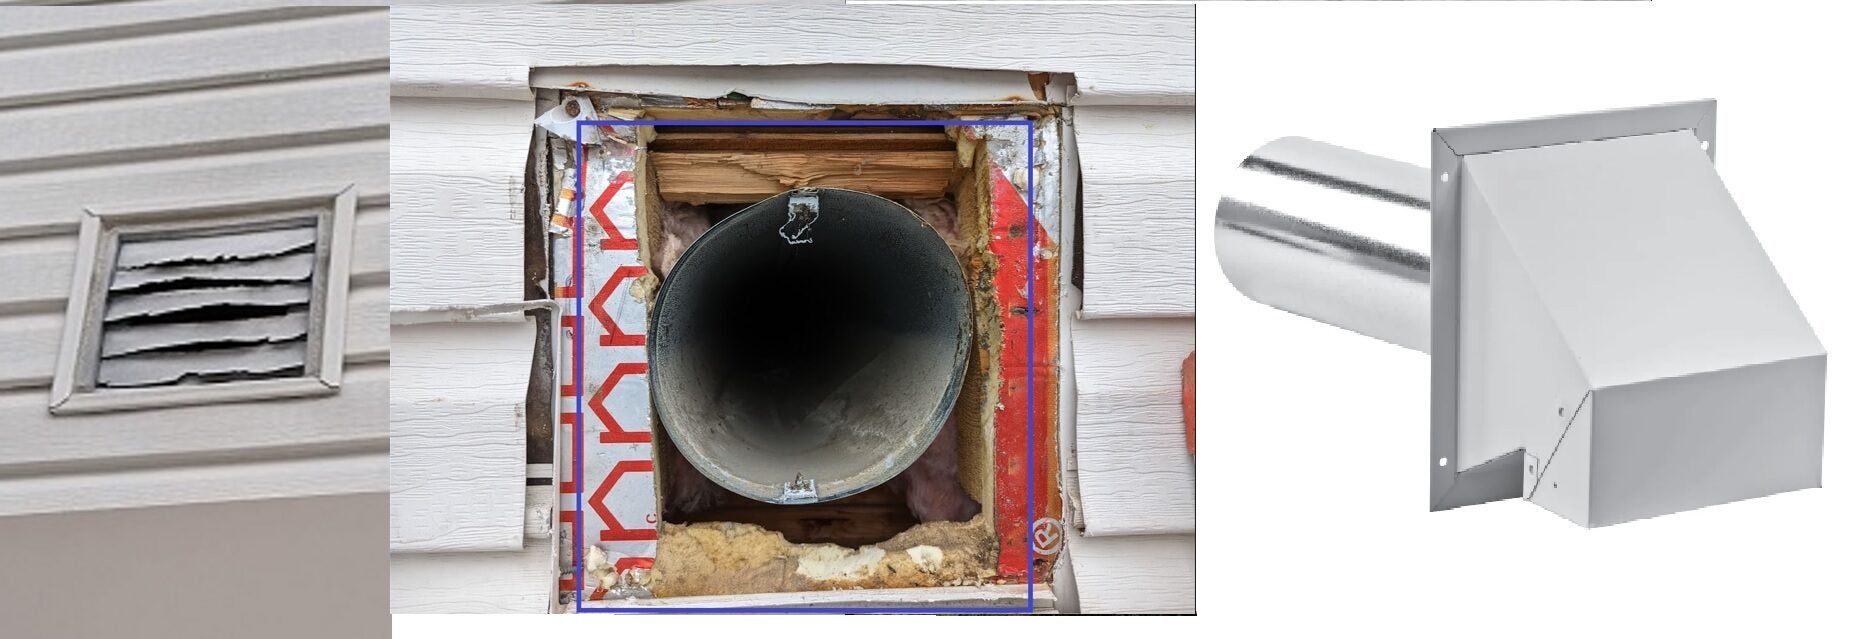 New outside vent for kitchen fan exhaust. - RedFlagDeals.com Forums